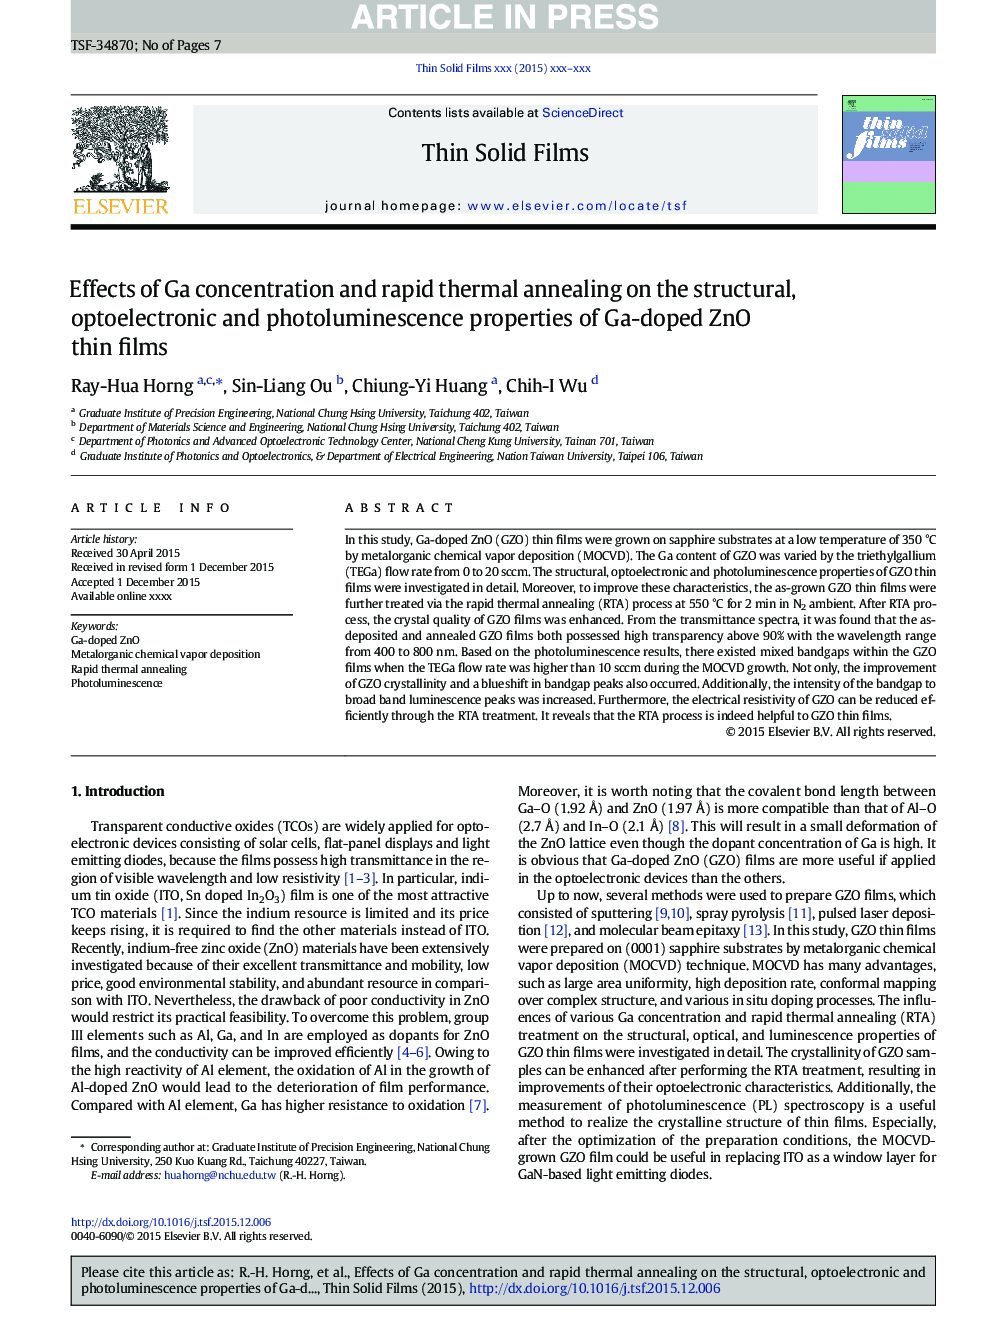 Effects of Ga concentration and rapid thermal annealing on the structural, optoelectronic and photoluminescence properties of Ga-doped ZnO thin films